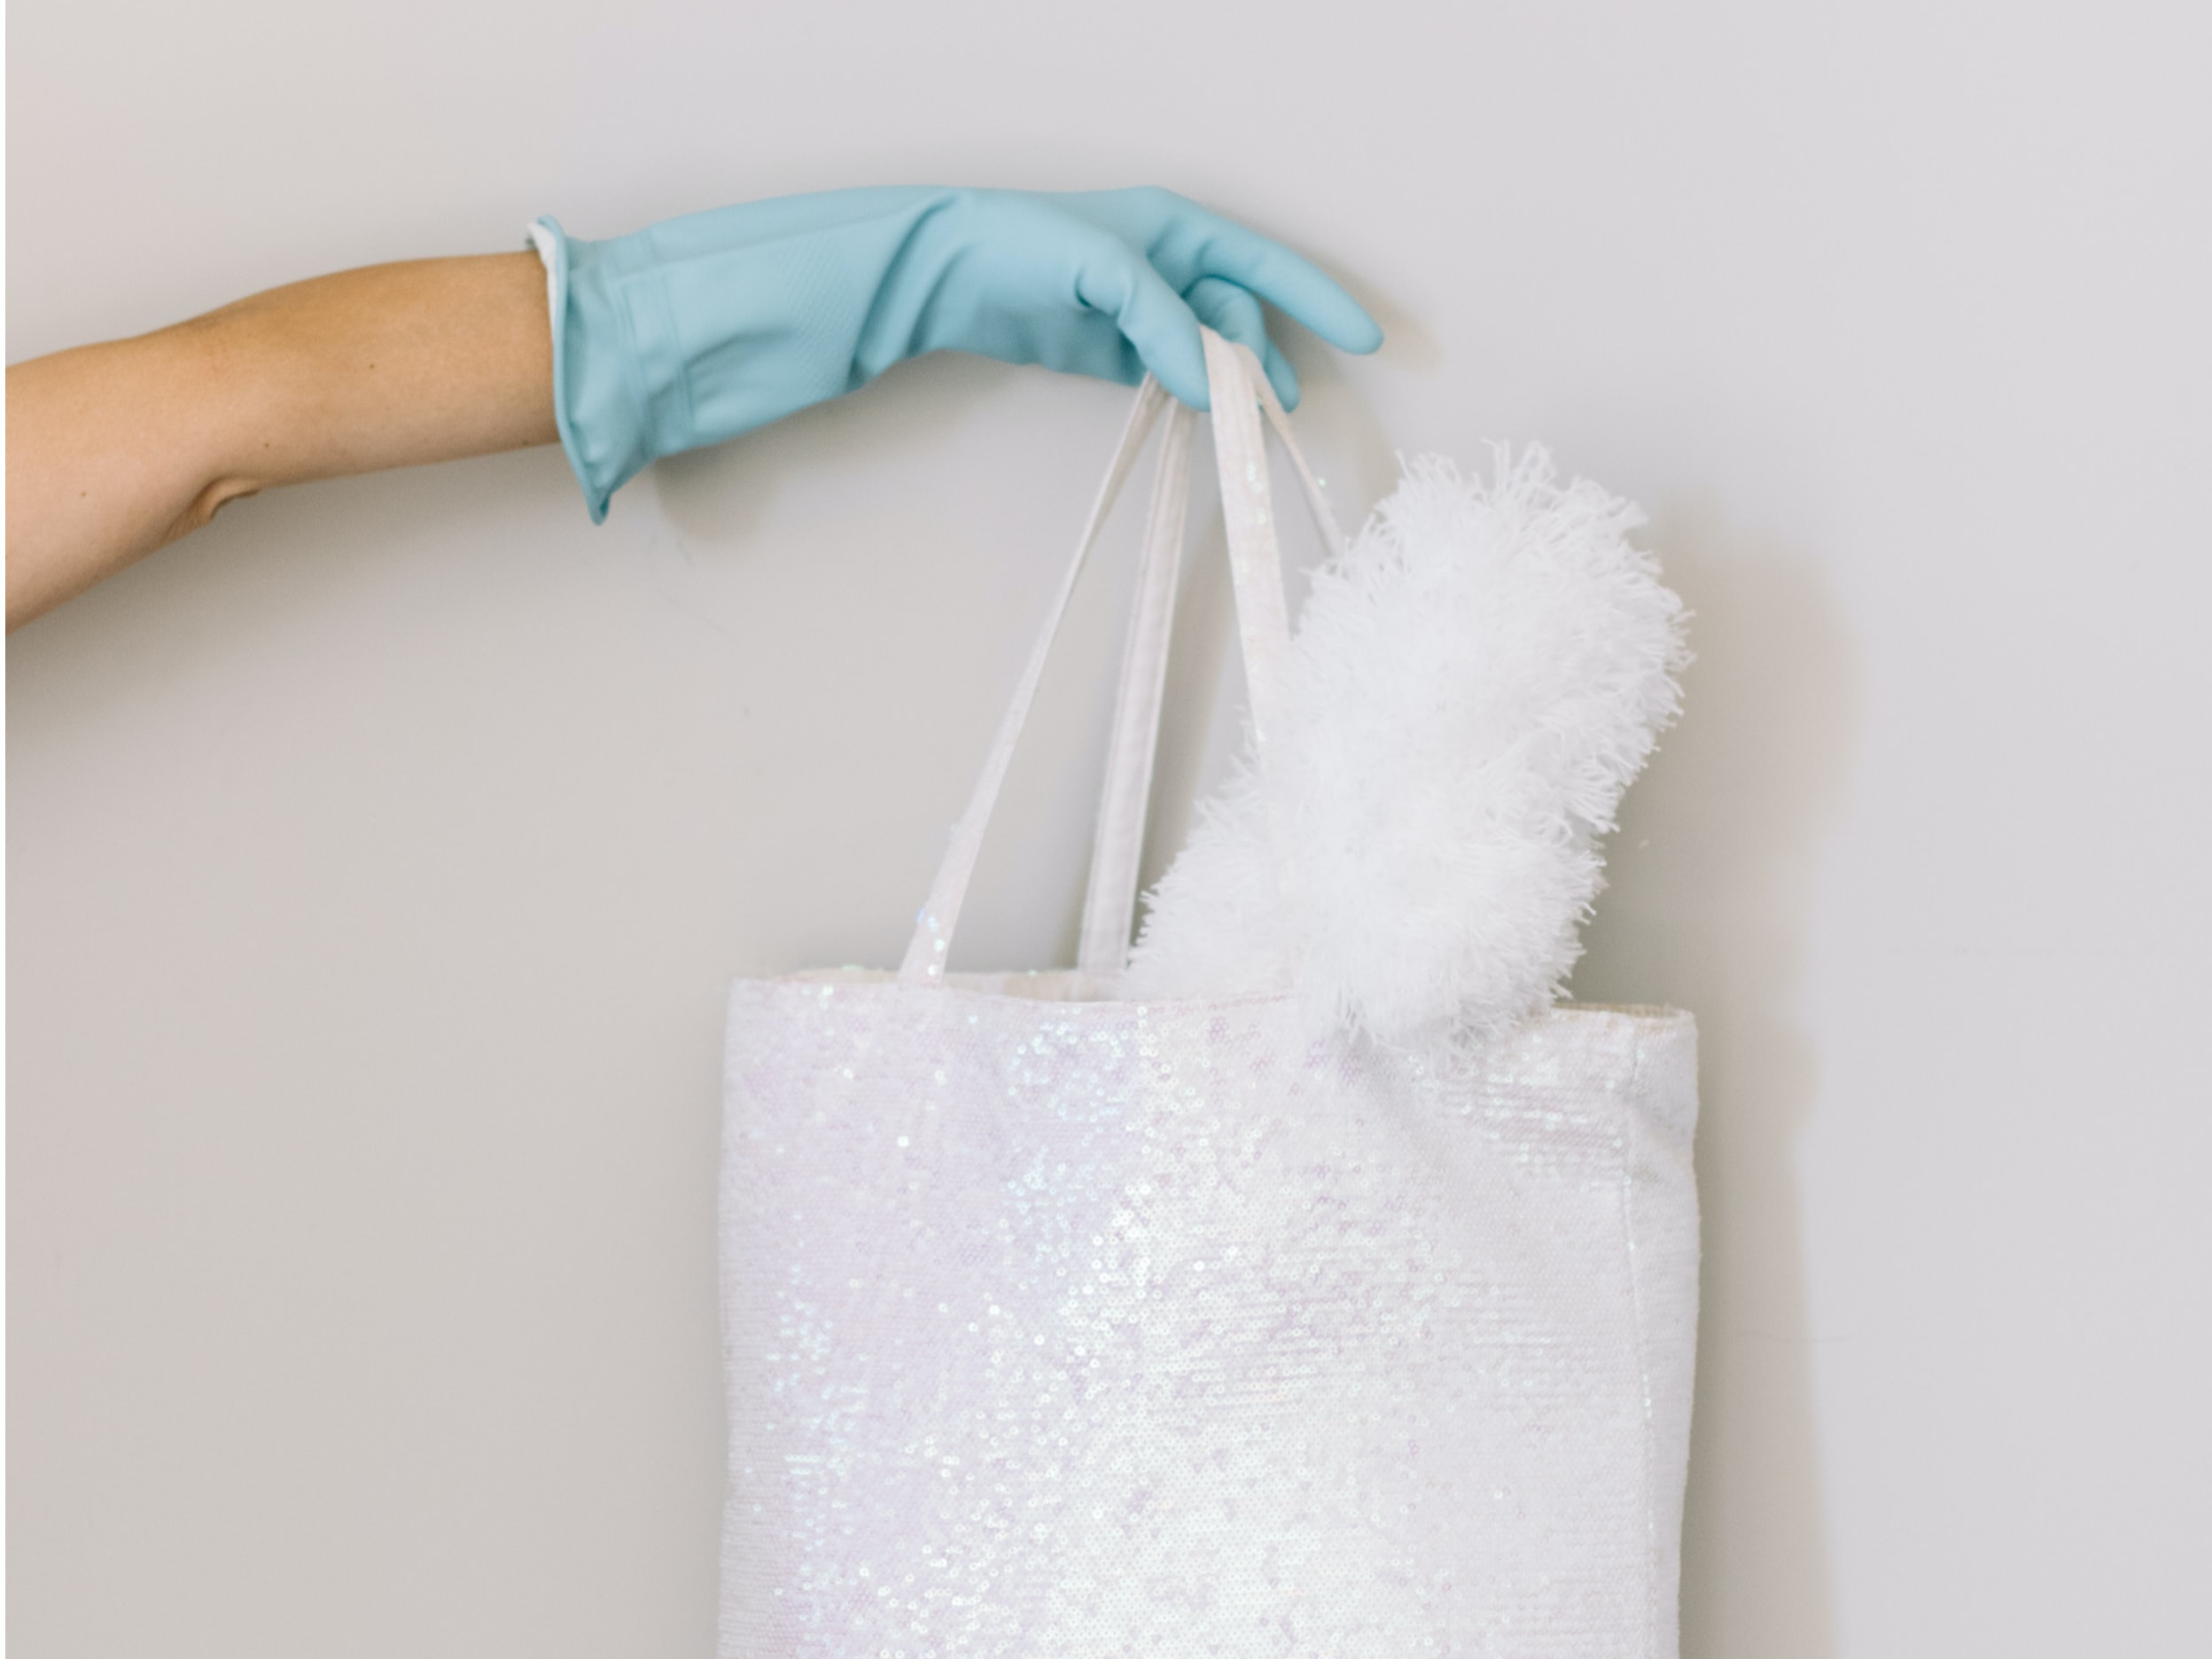 A person with a rubber glove holding a bag, contaminants cling to objects, such as the bag, just like ions attach to particles in the air.